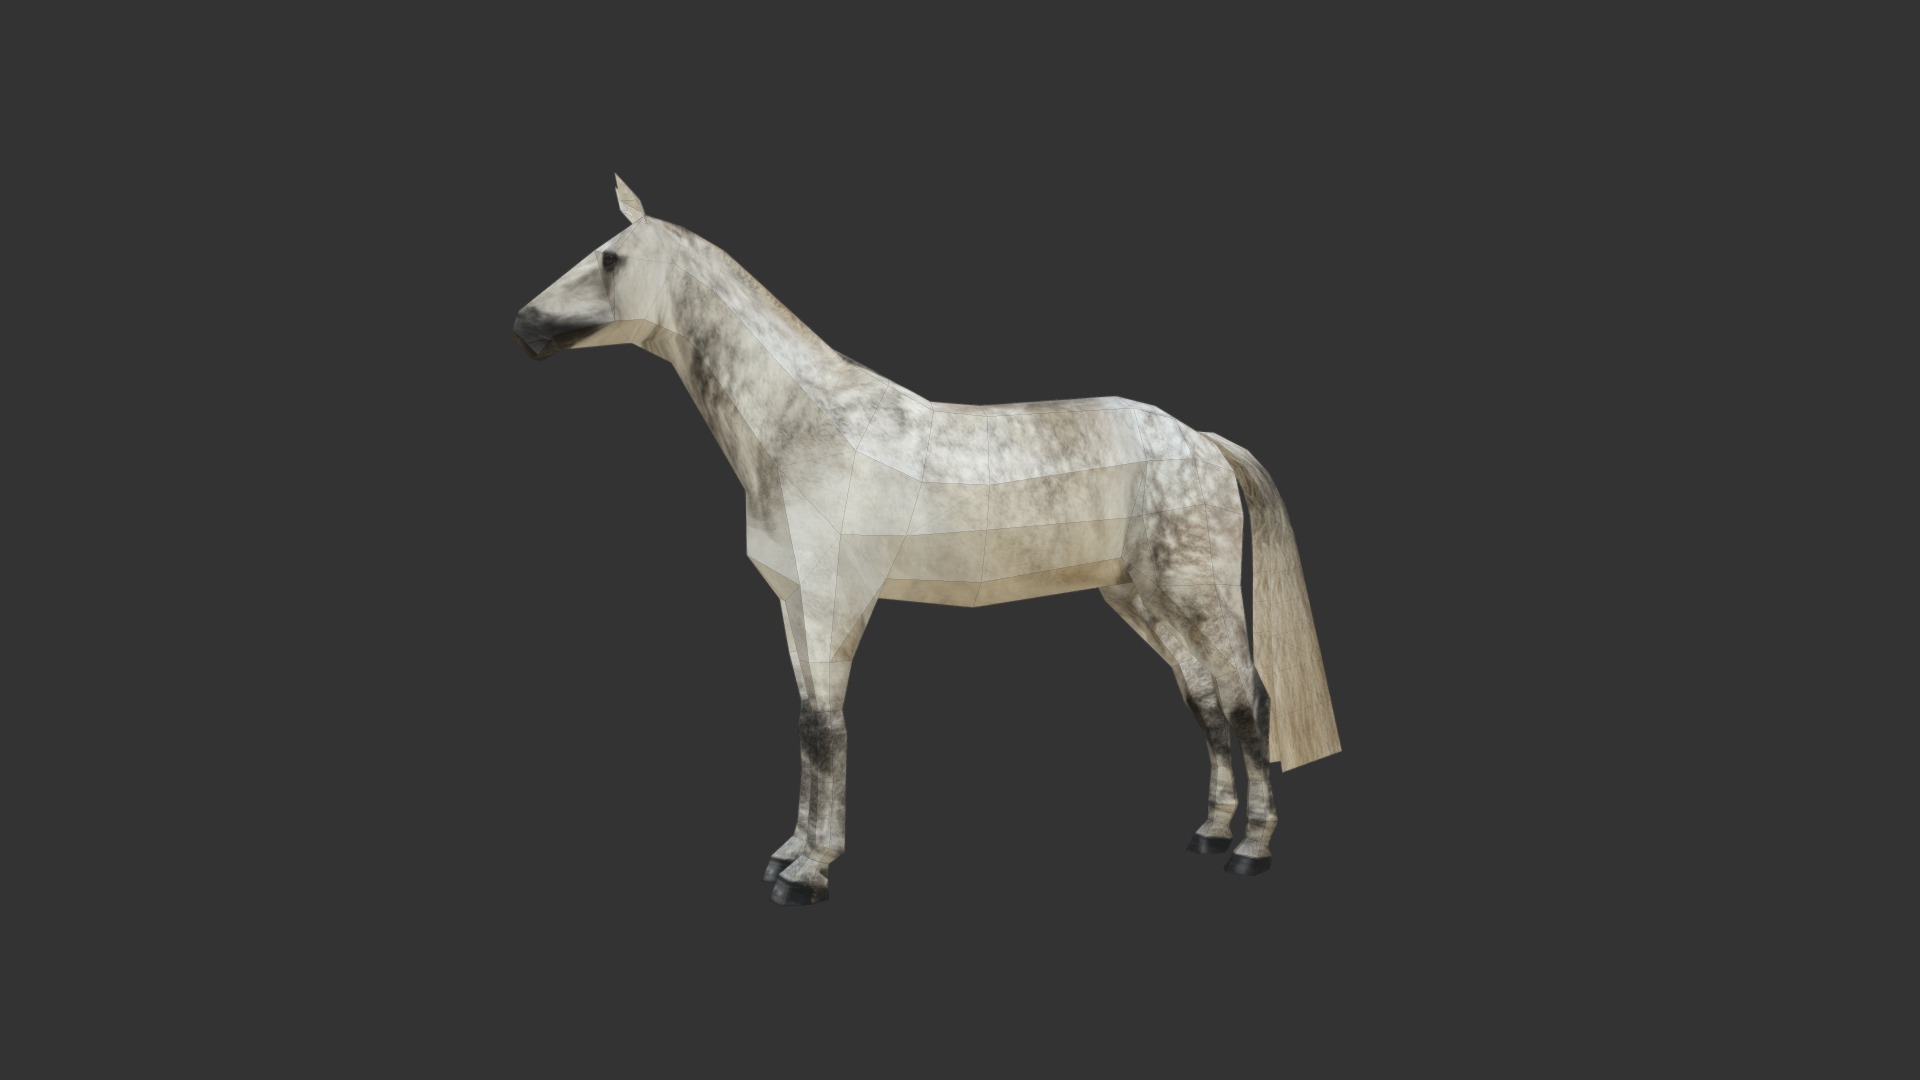 3D model Horse-textured low-poly. - This is a 3D model of the Horse-textured low-poly.. The 3D model is about a white horse with a black background.